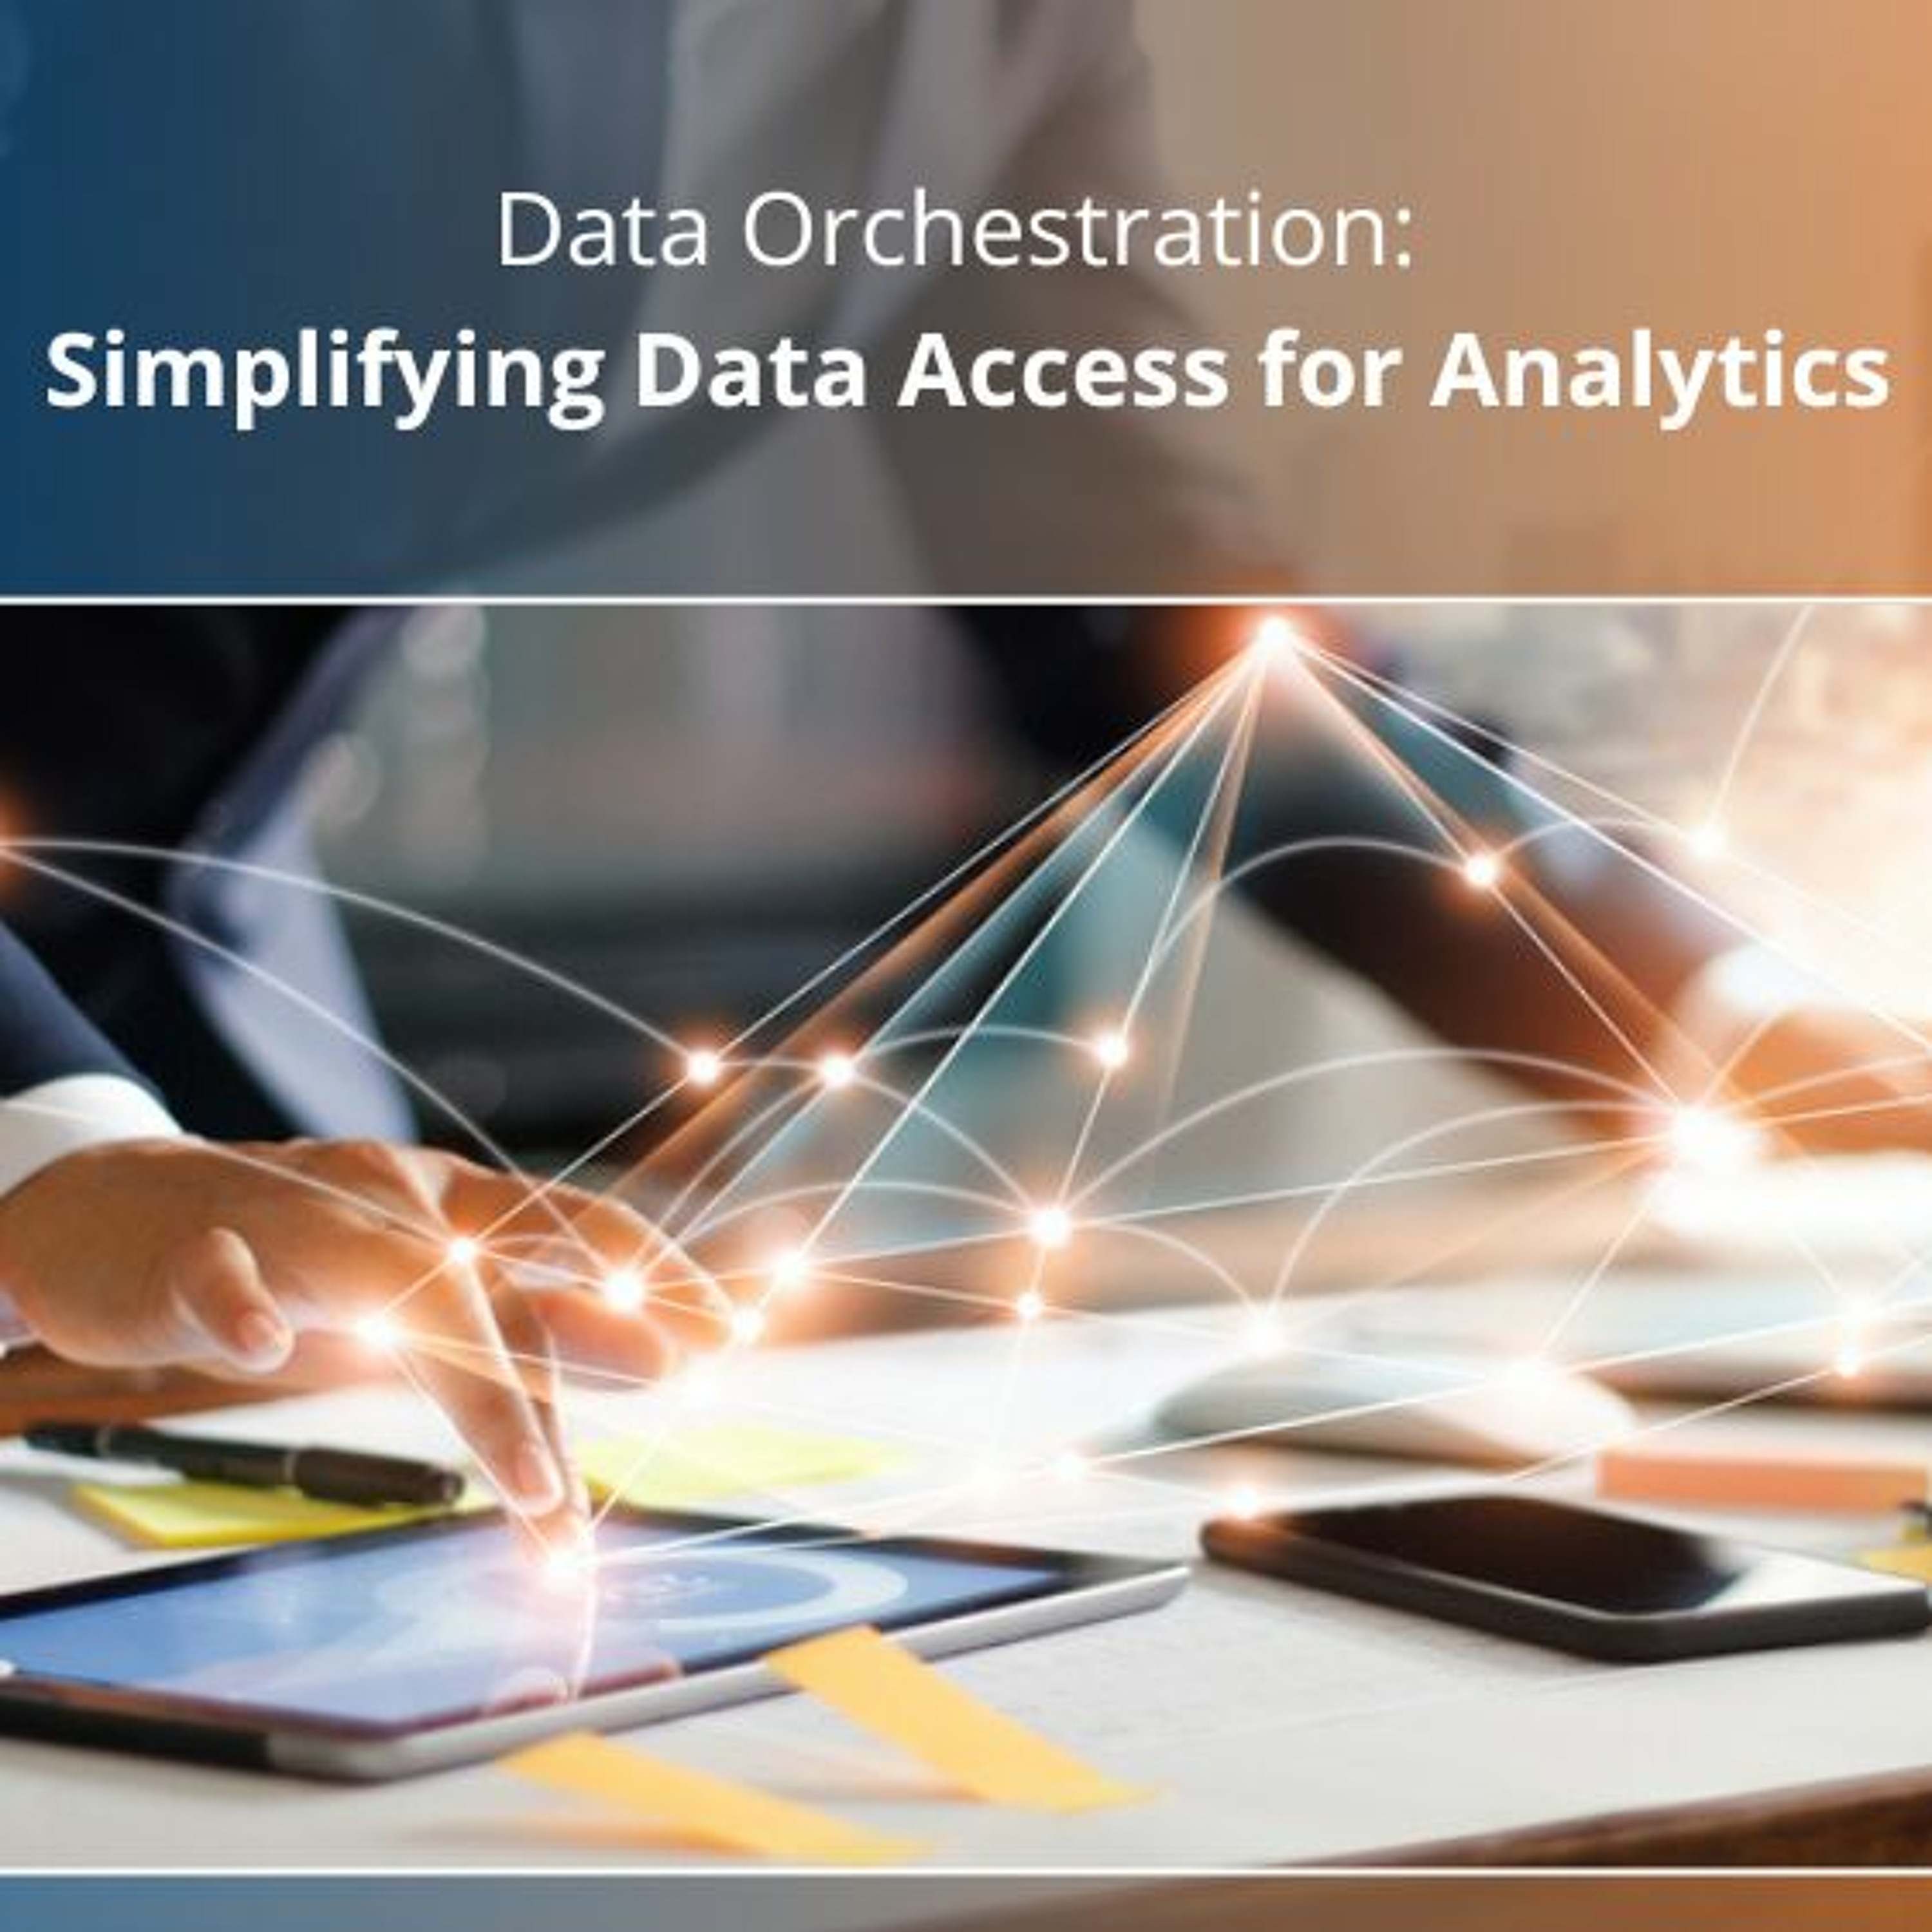 Data Orchestration: Simplifying Data Access For Analytics - Audio Blog